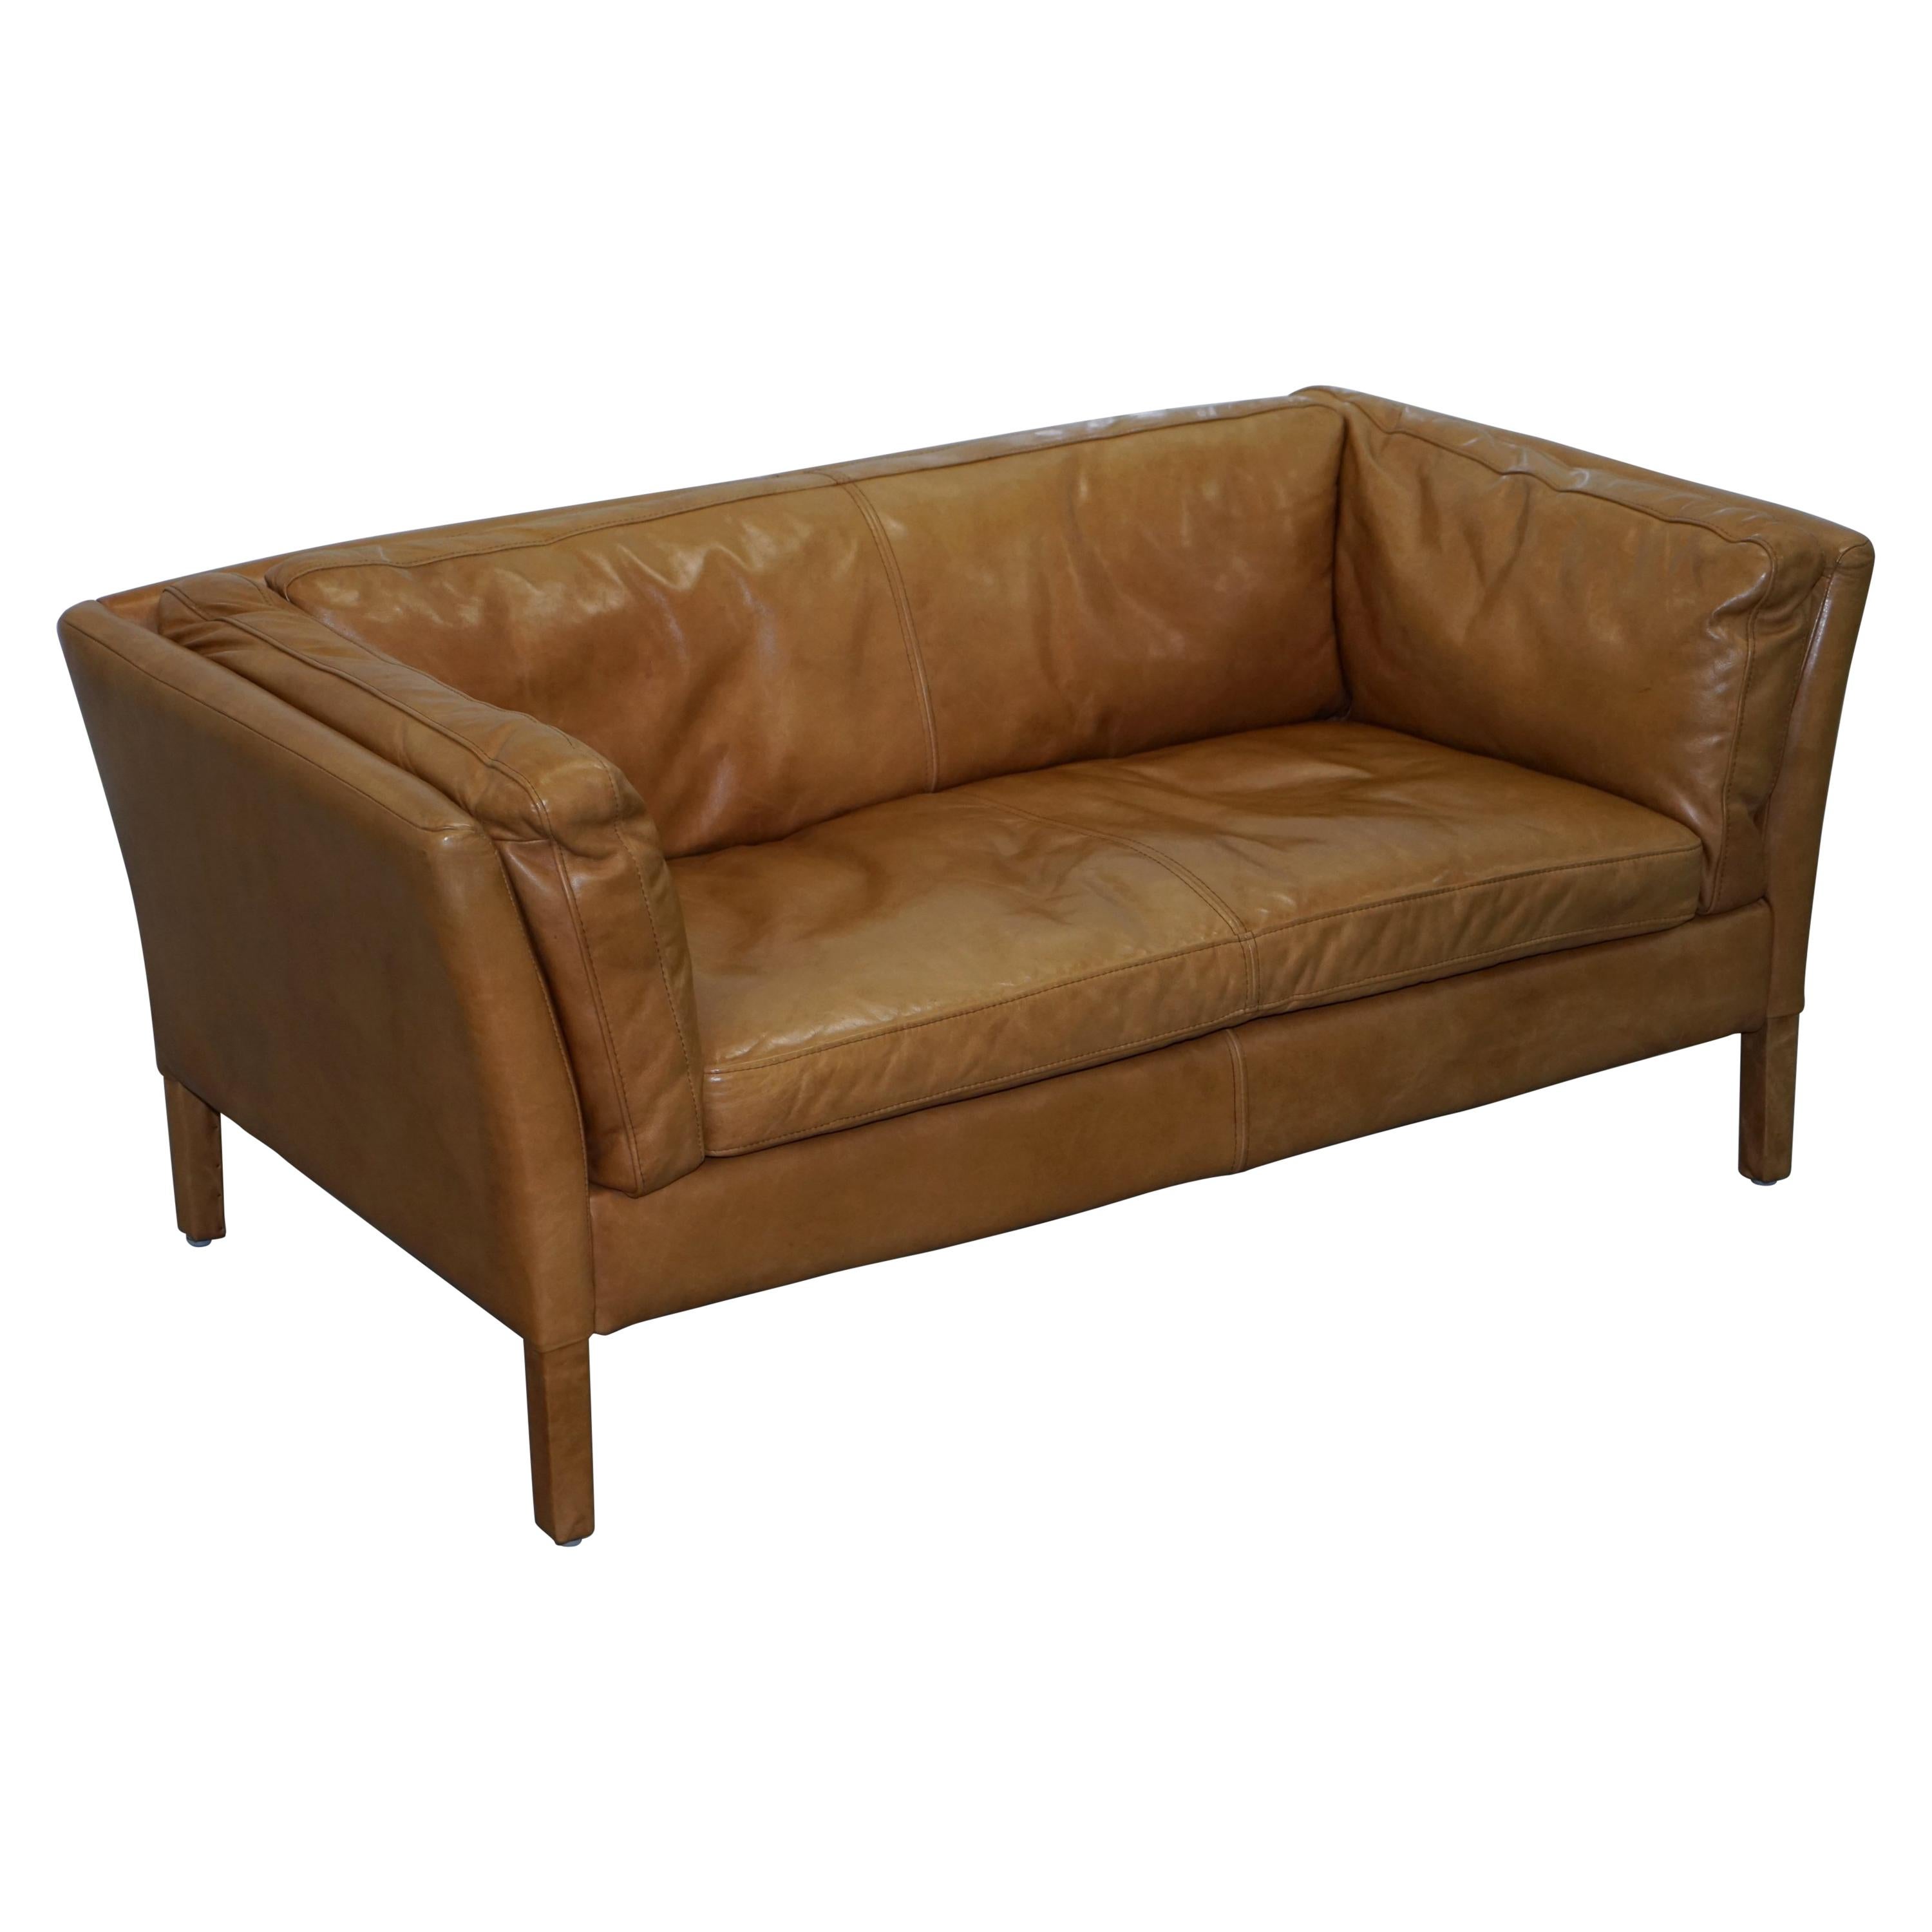 Halo Groucho Leather Small 2-Seat Sofa Matching Armchair Available